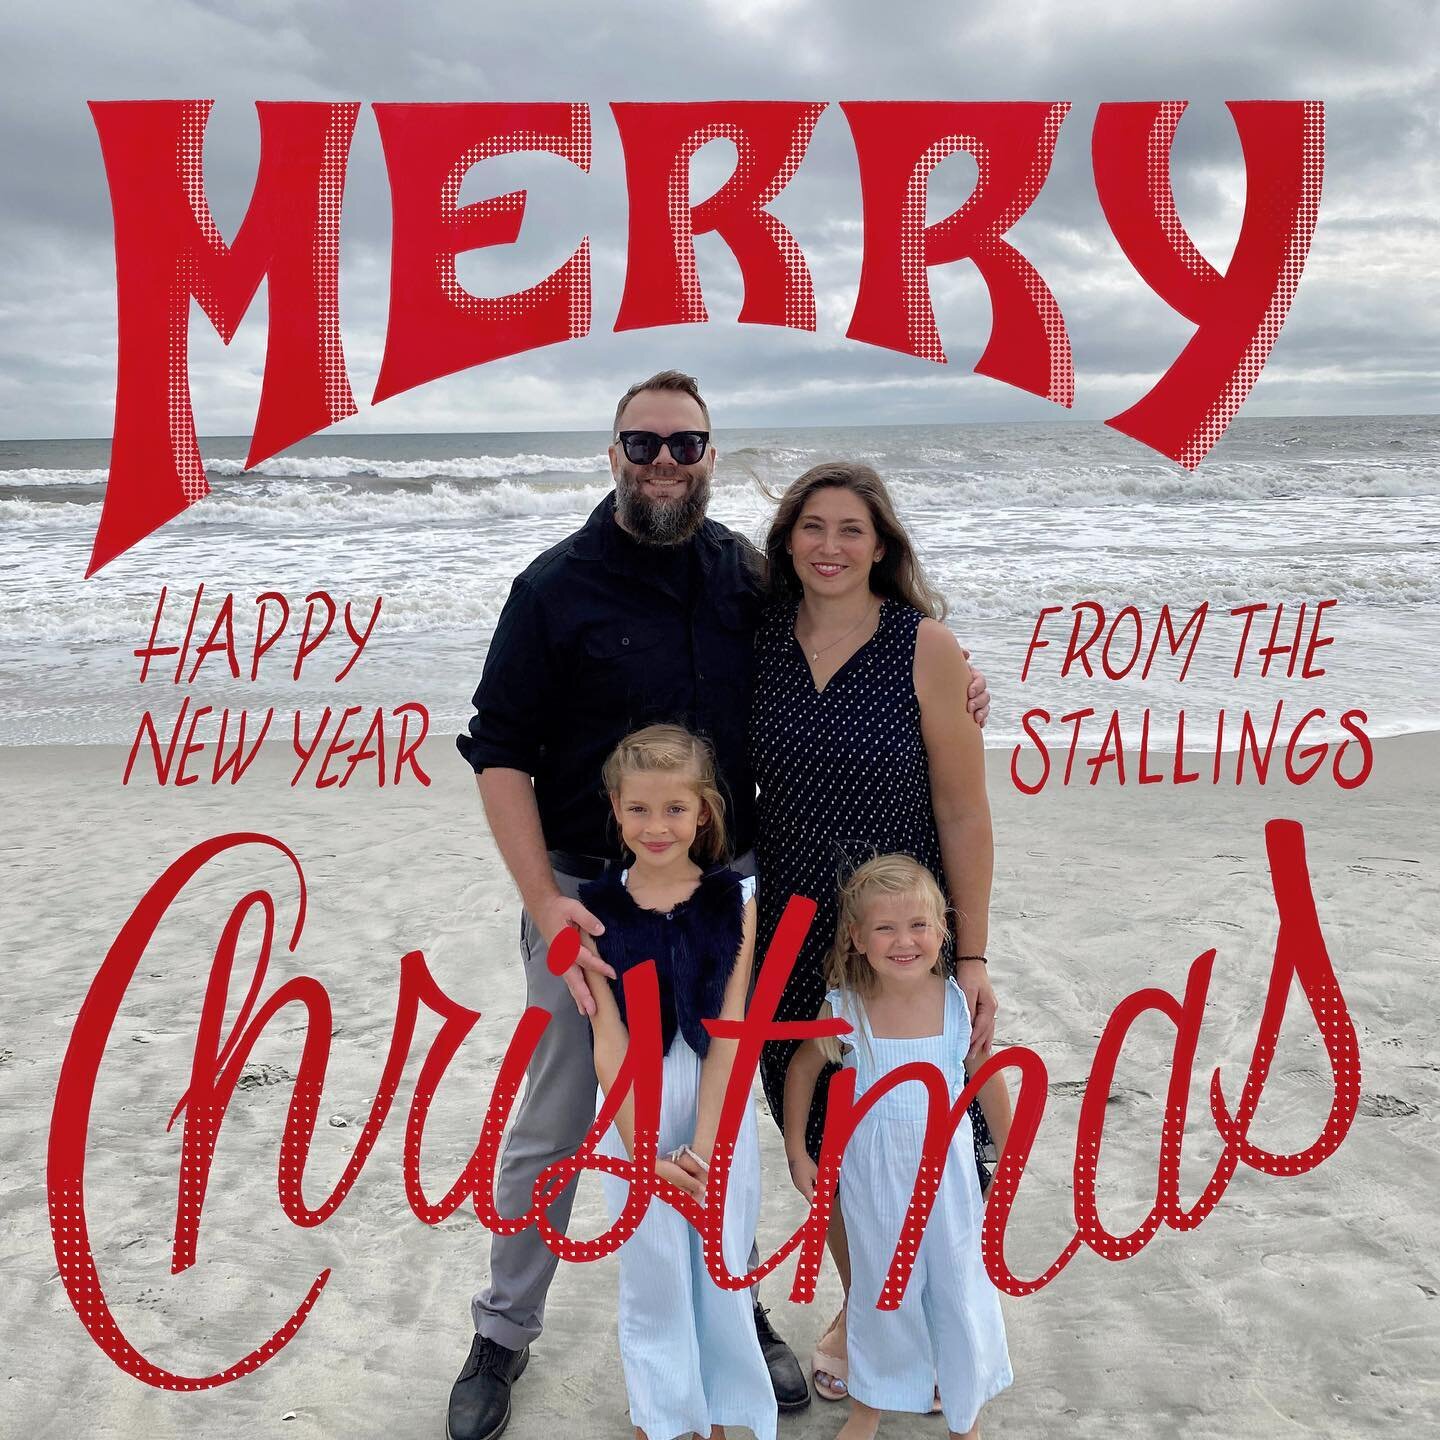 Merry Christmas one and all! May love, grace and merriment overtake you during this holiday season! It&rsquo;s been a ride and the holiday season finds us in unexpected locations. Best to move forward without regrets, without fear and move with hope 